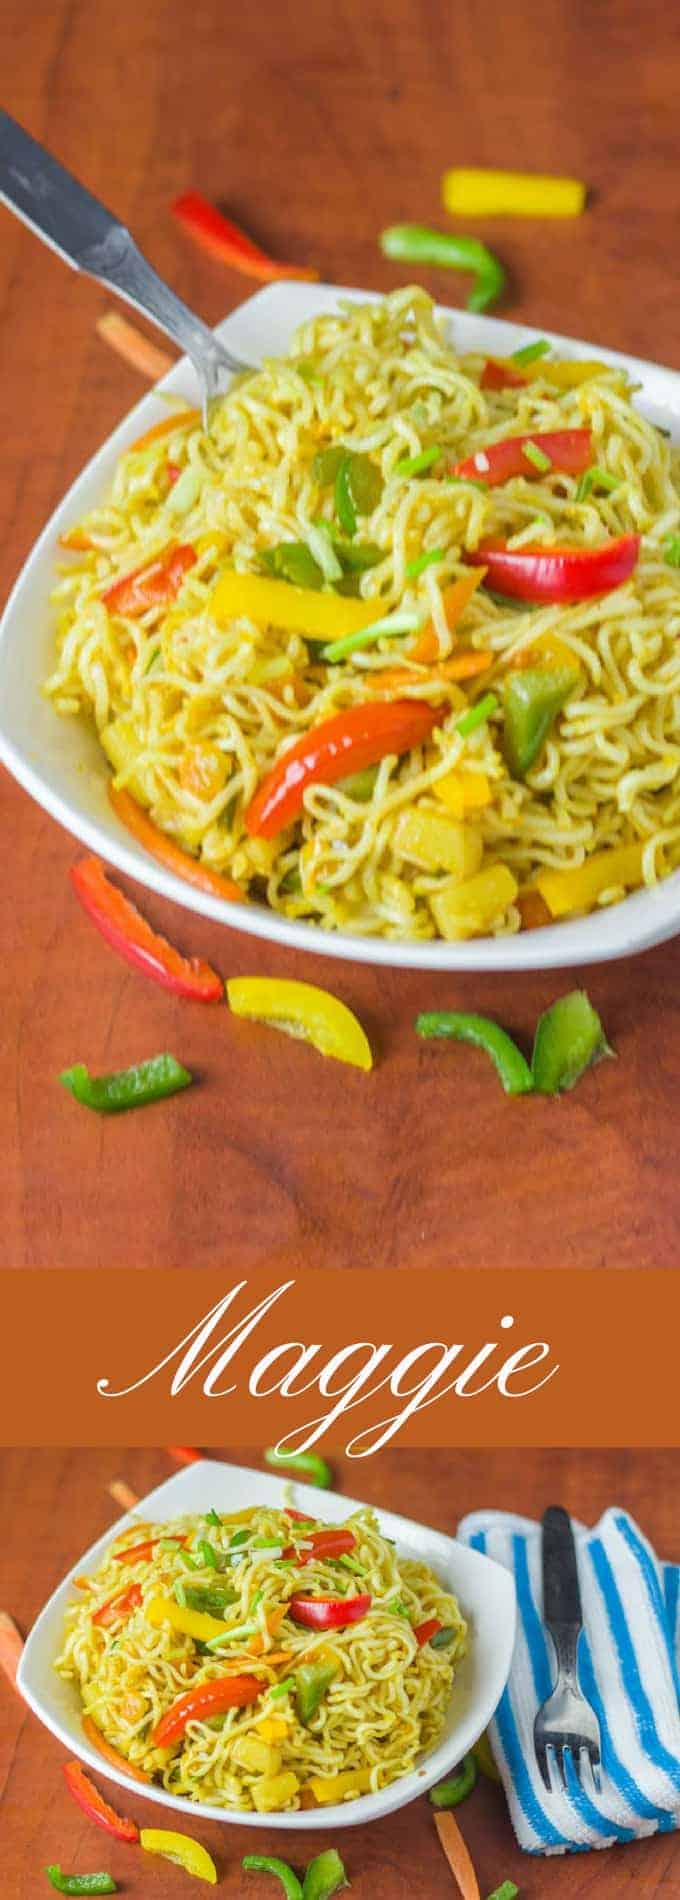 Maggi Noodles in Magic Masala Style - Indian Snacks Recipes